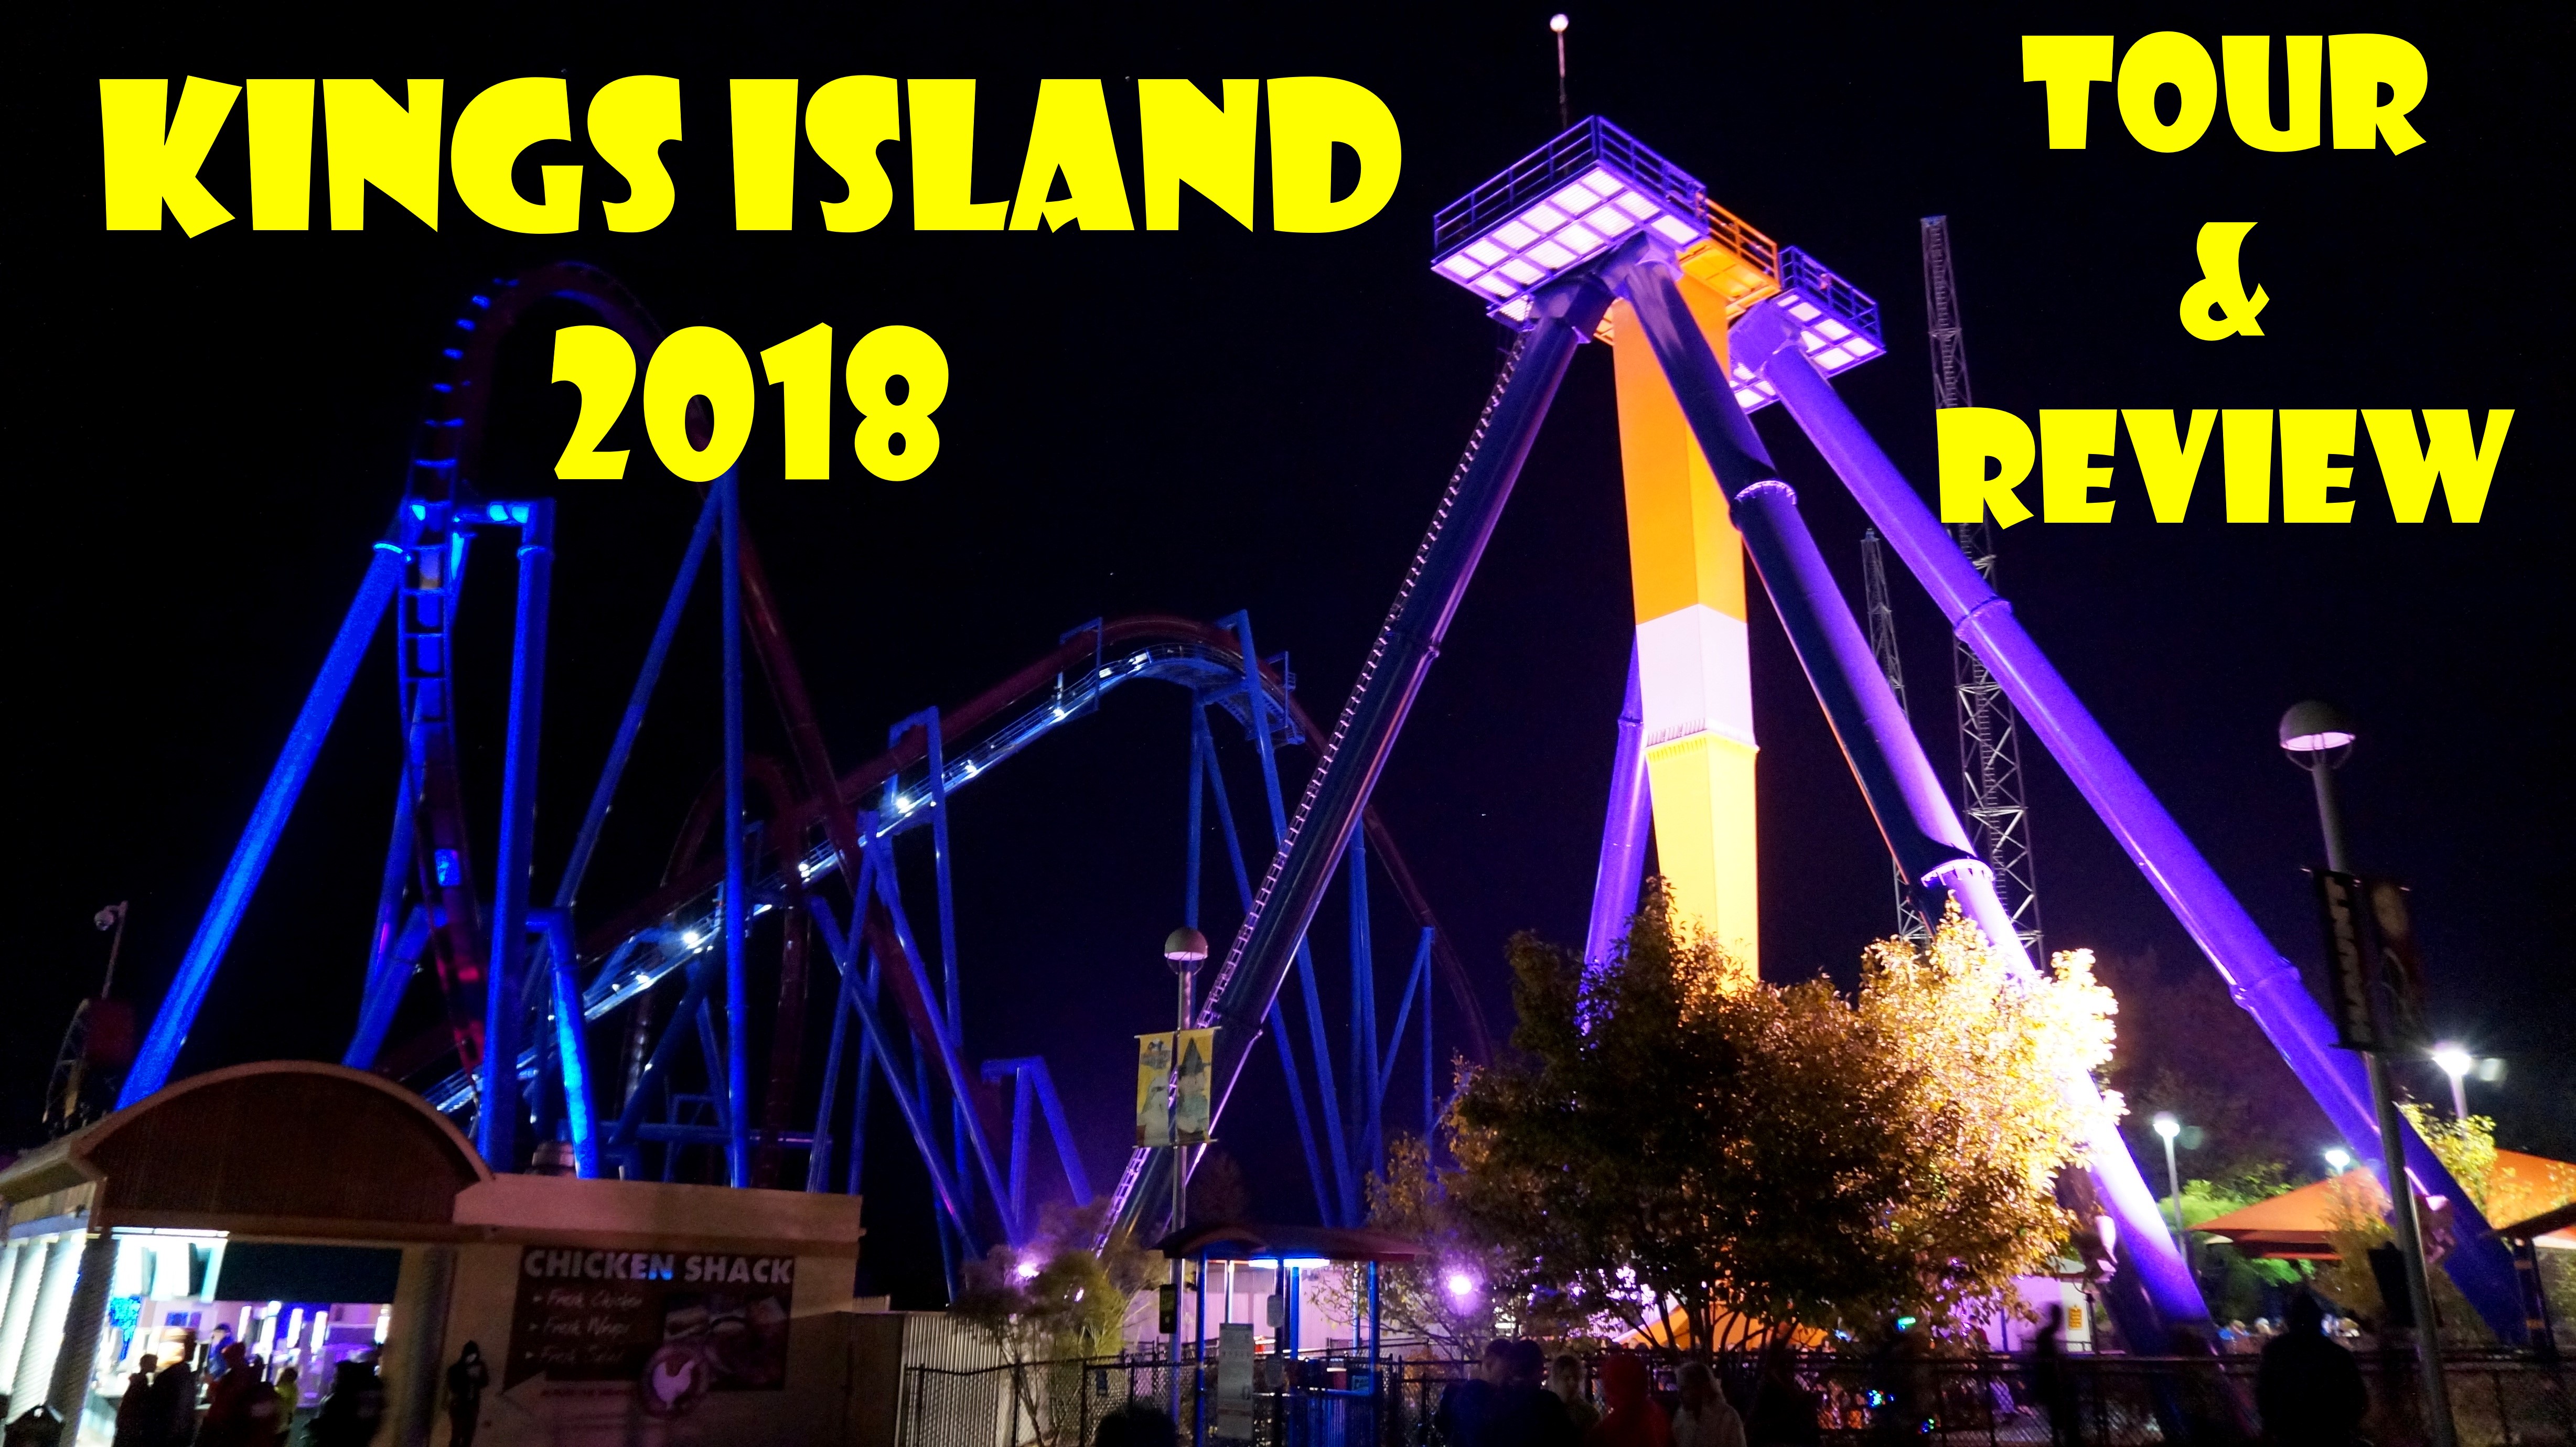 KINGS ISLAND 2018 TOUR & REVIEW (NELSON’S FIRST VISIT TO KI!)